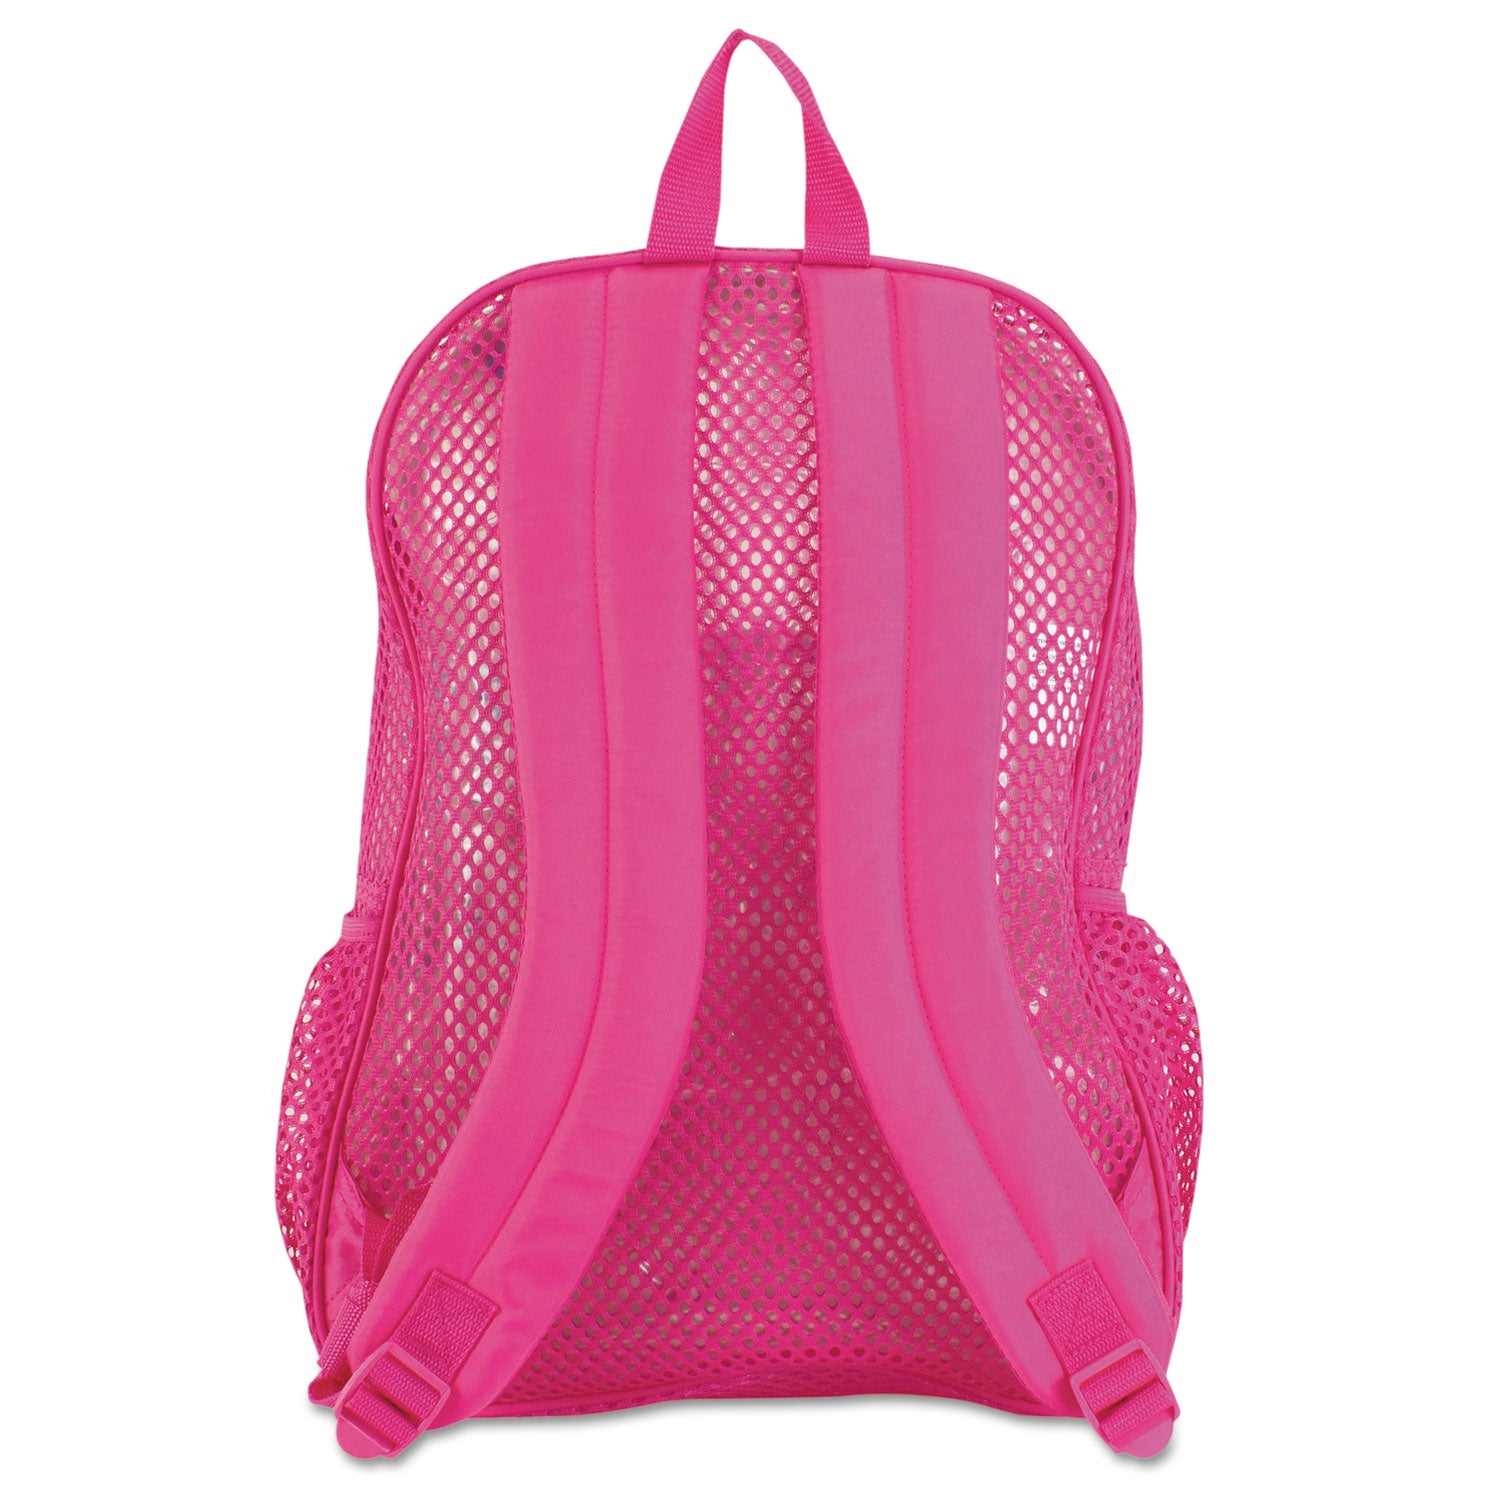 Mesh Backpack, Fits Devices Up to 17", Polyester, 12 x 5 x 18, Clear/English Rose - 